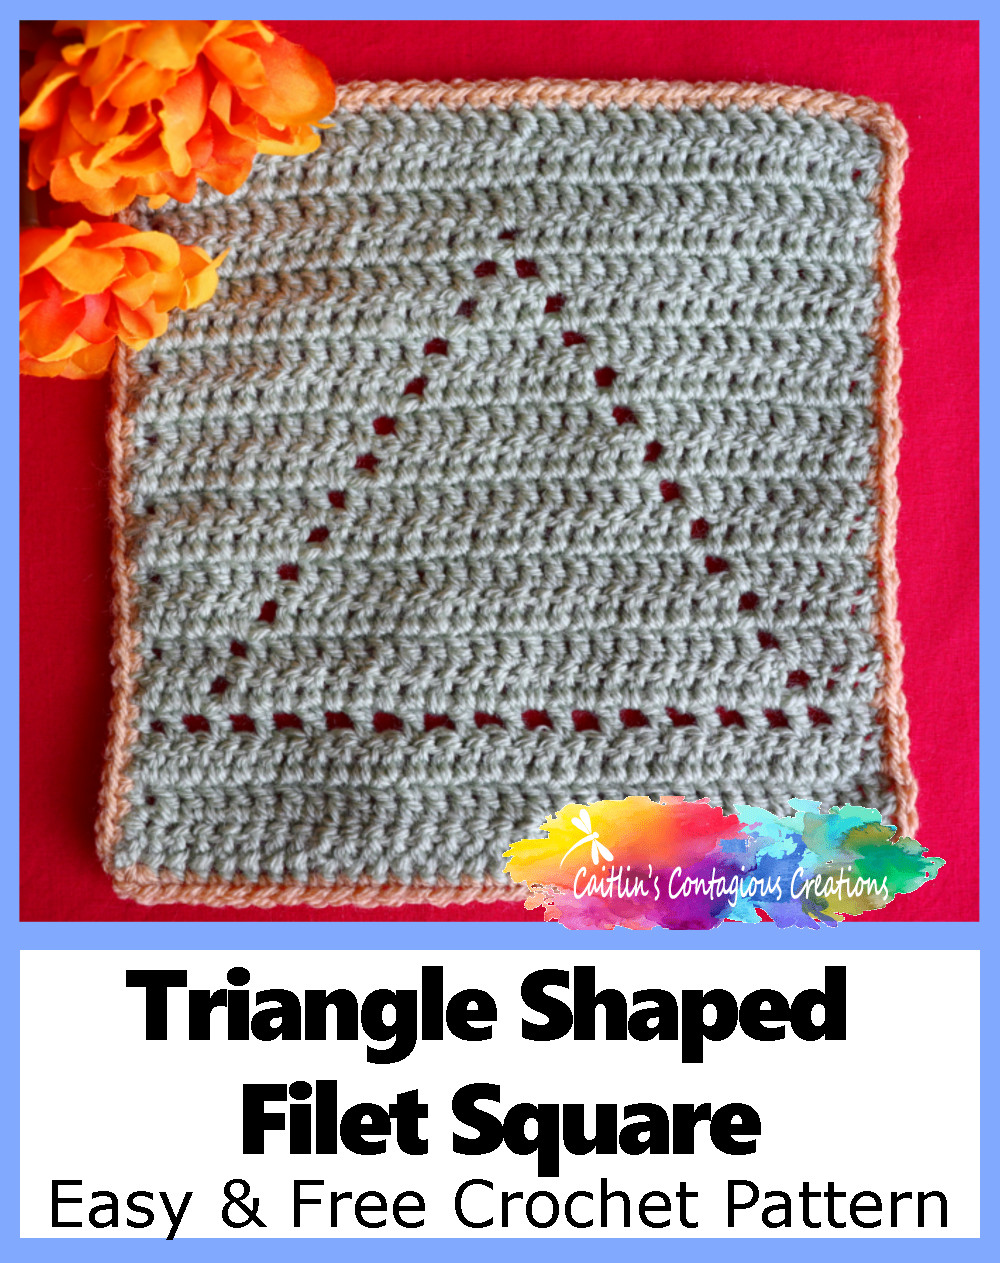 Free Triangle Shape Filet Square Crochet Pattern easy to follow directions and photo tutorial.